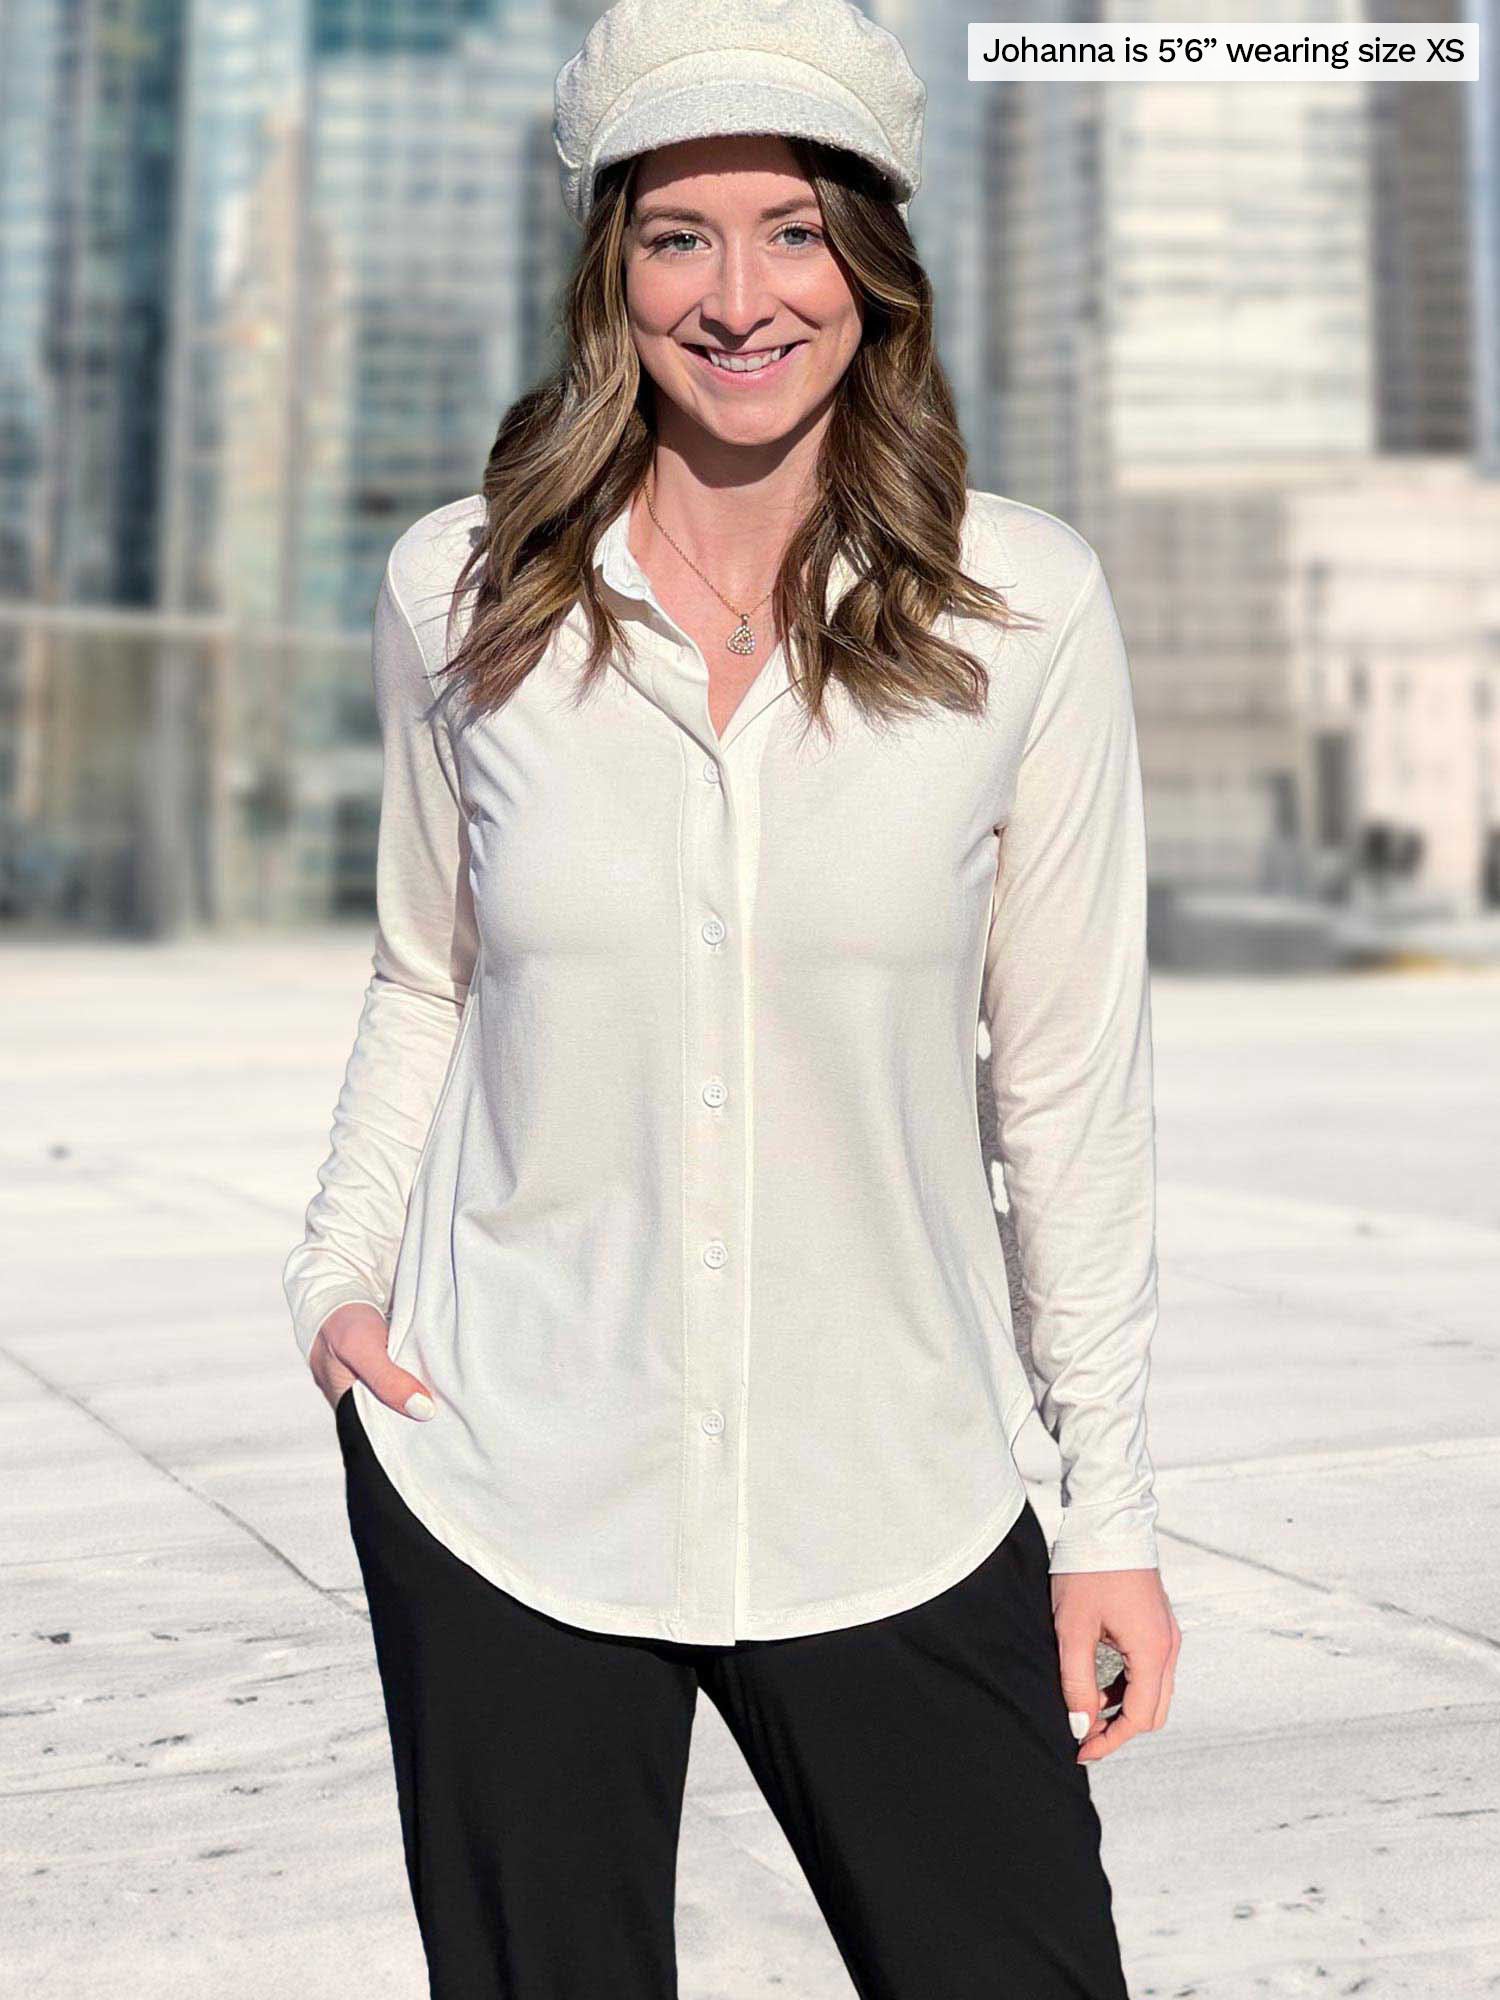 Susan button up dress shirt, Sustainable women's clothing made in Canada